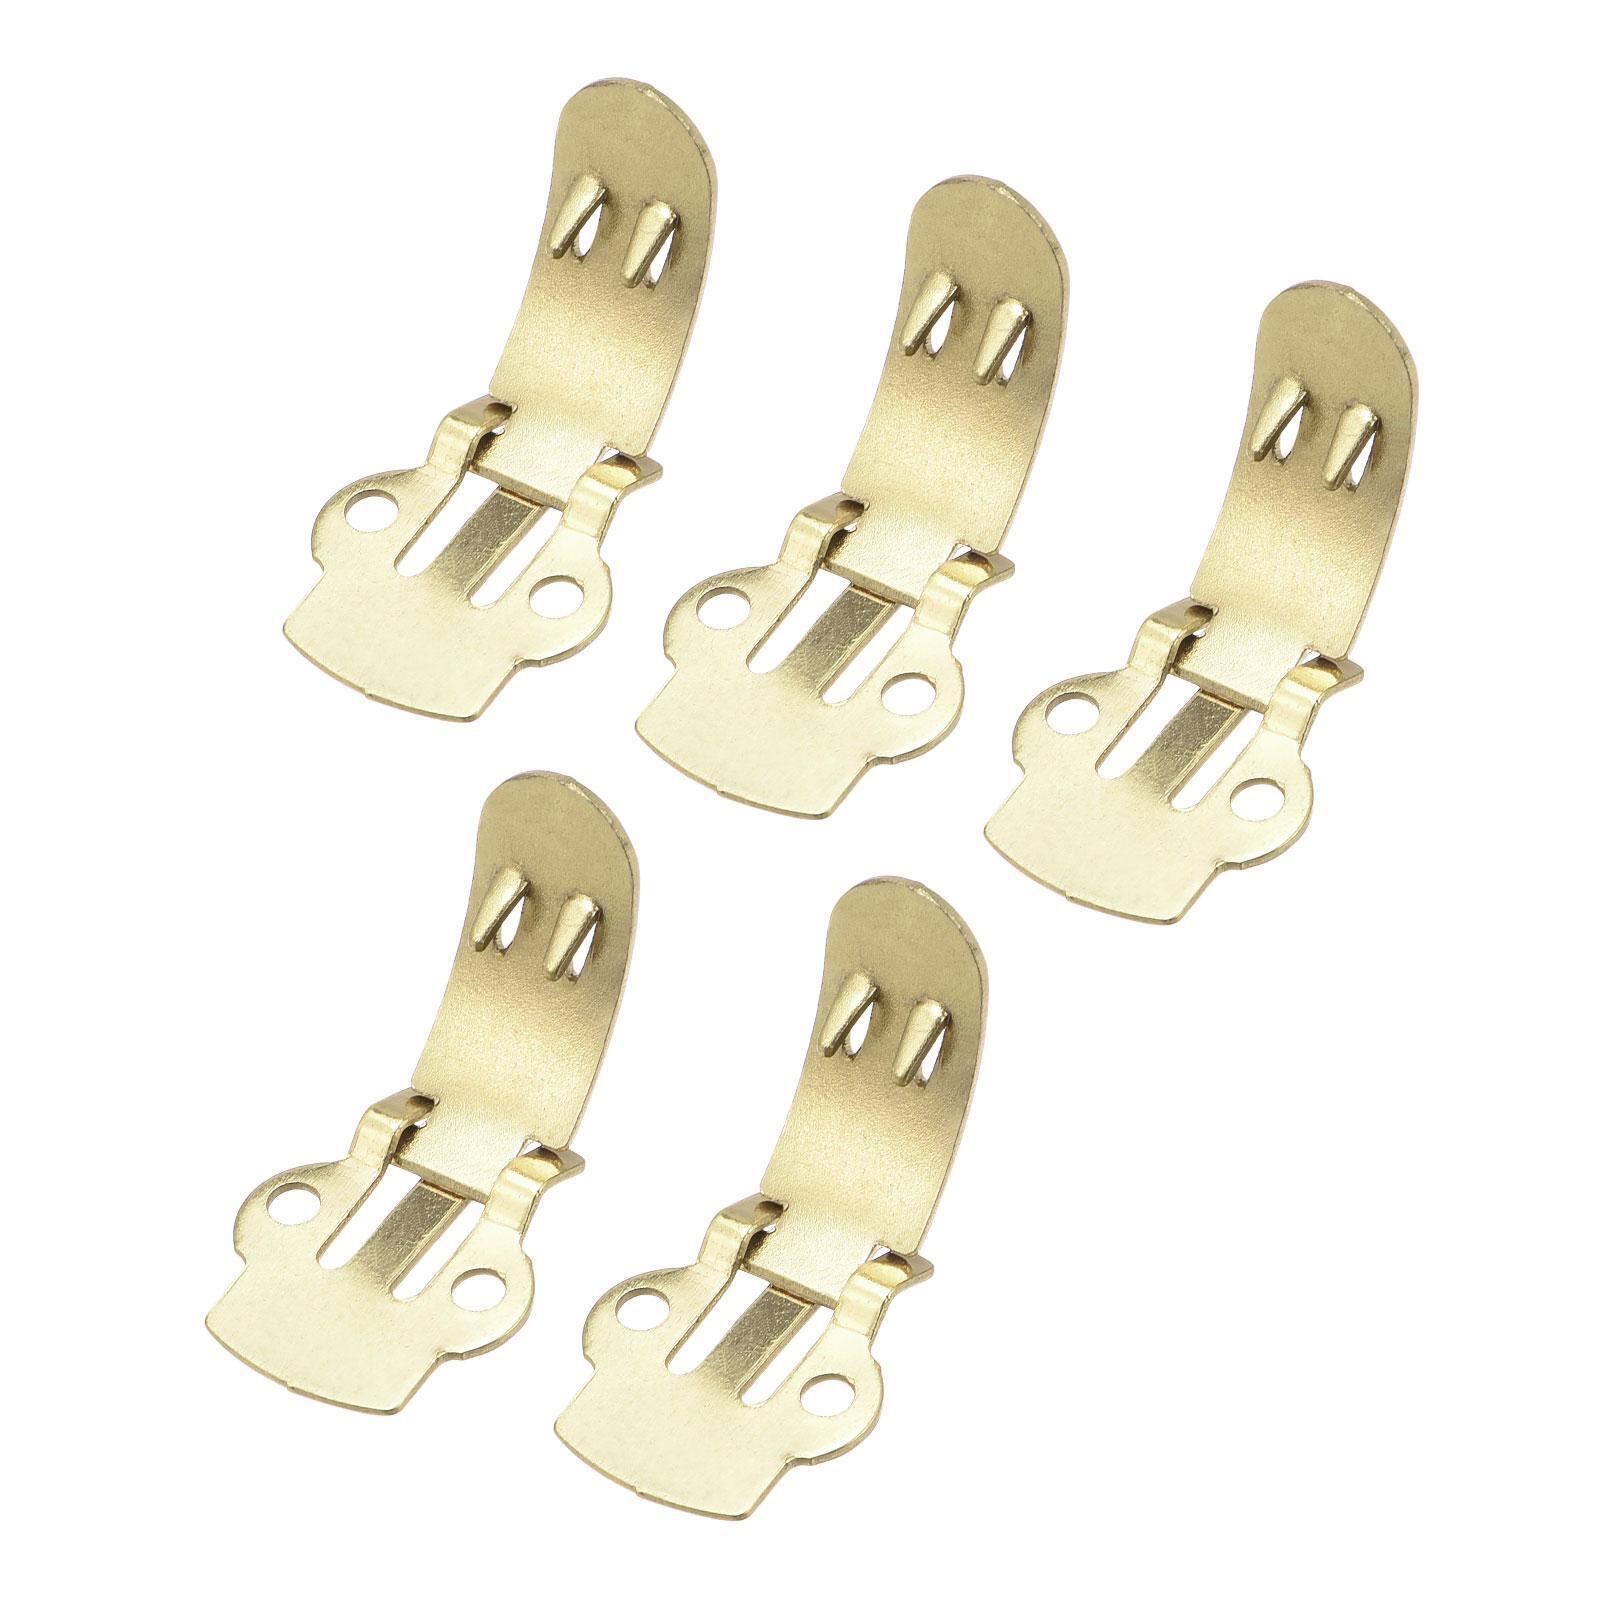 Blank Shoe Clips 28mm X 14mm Iron For Diy Crafts Decoration Gold Tone 20 Pcs